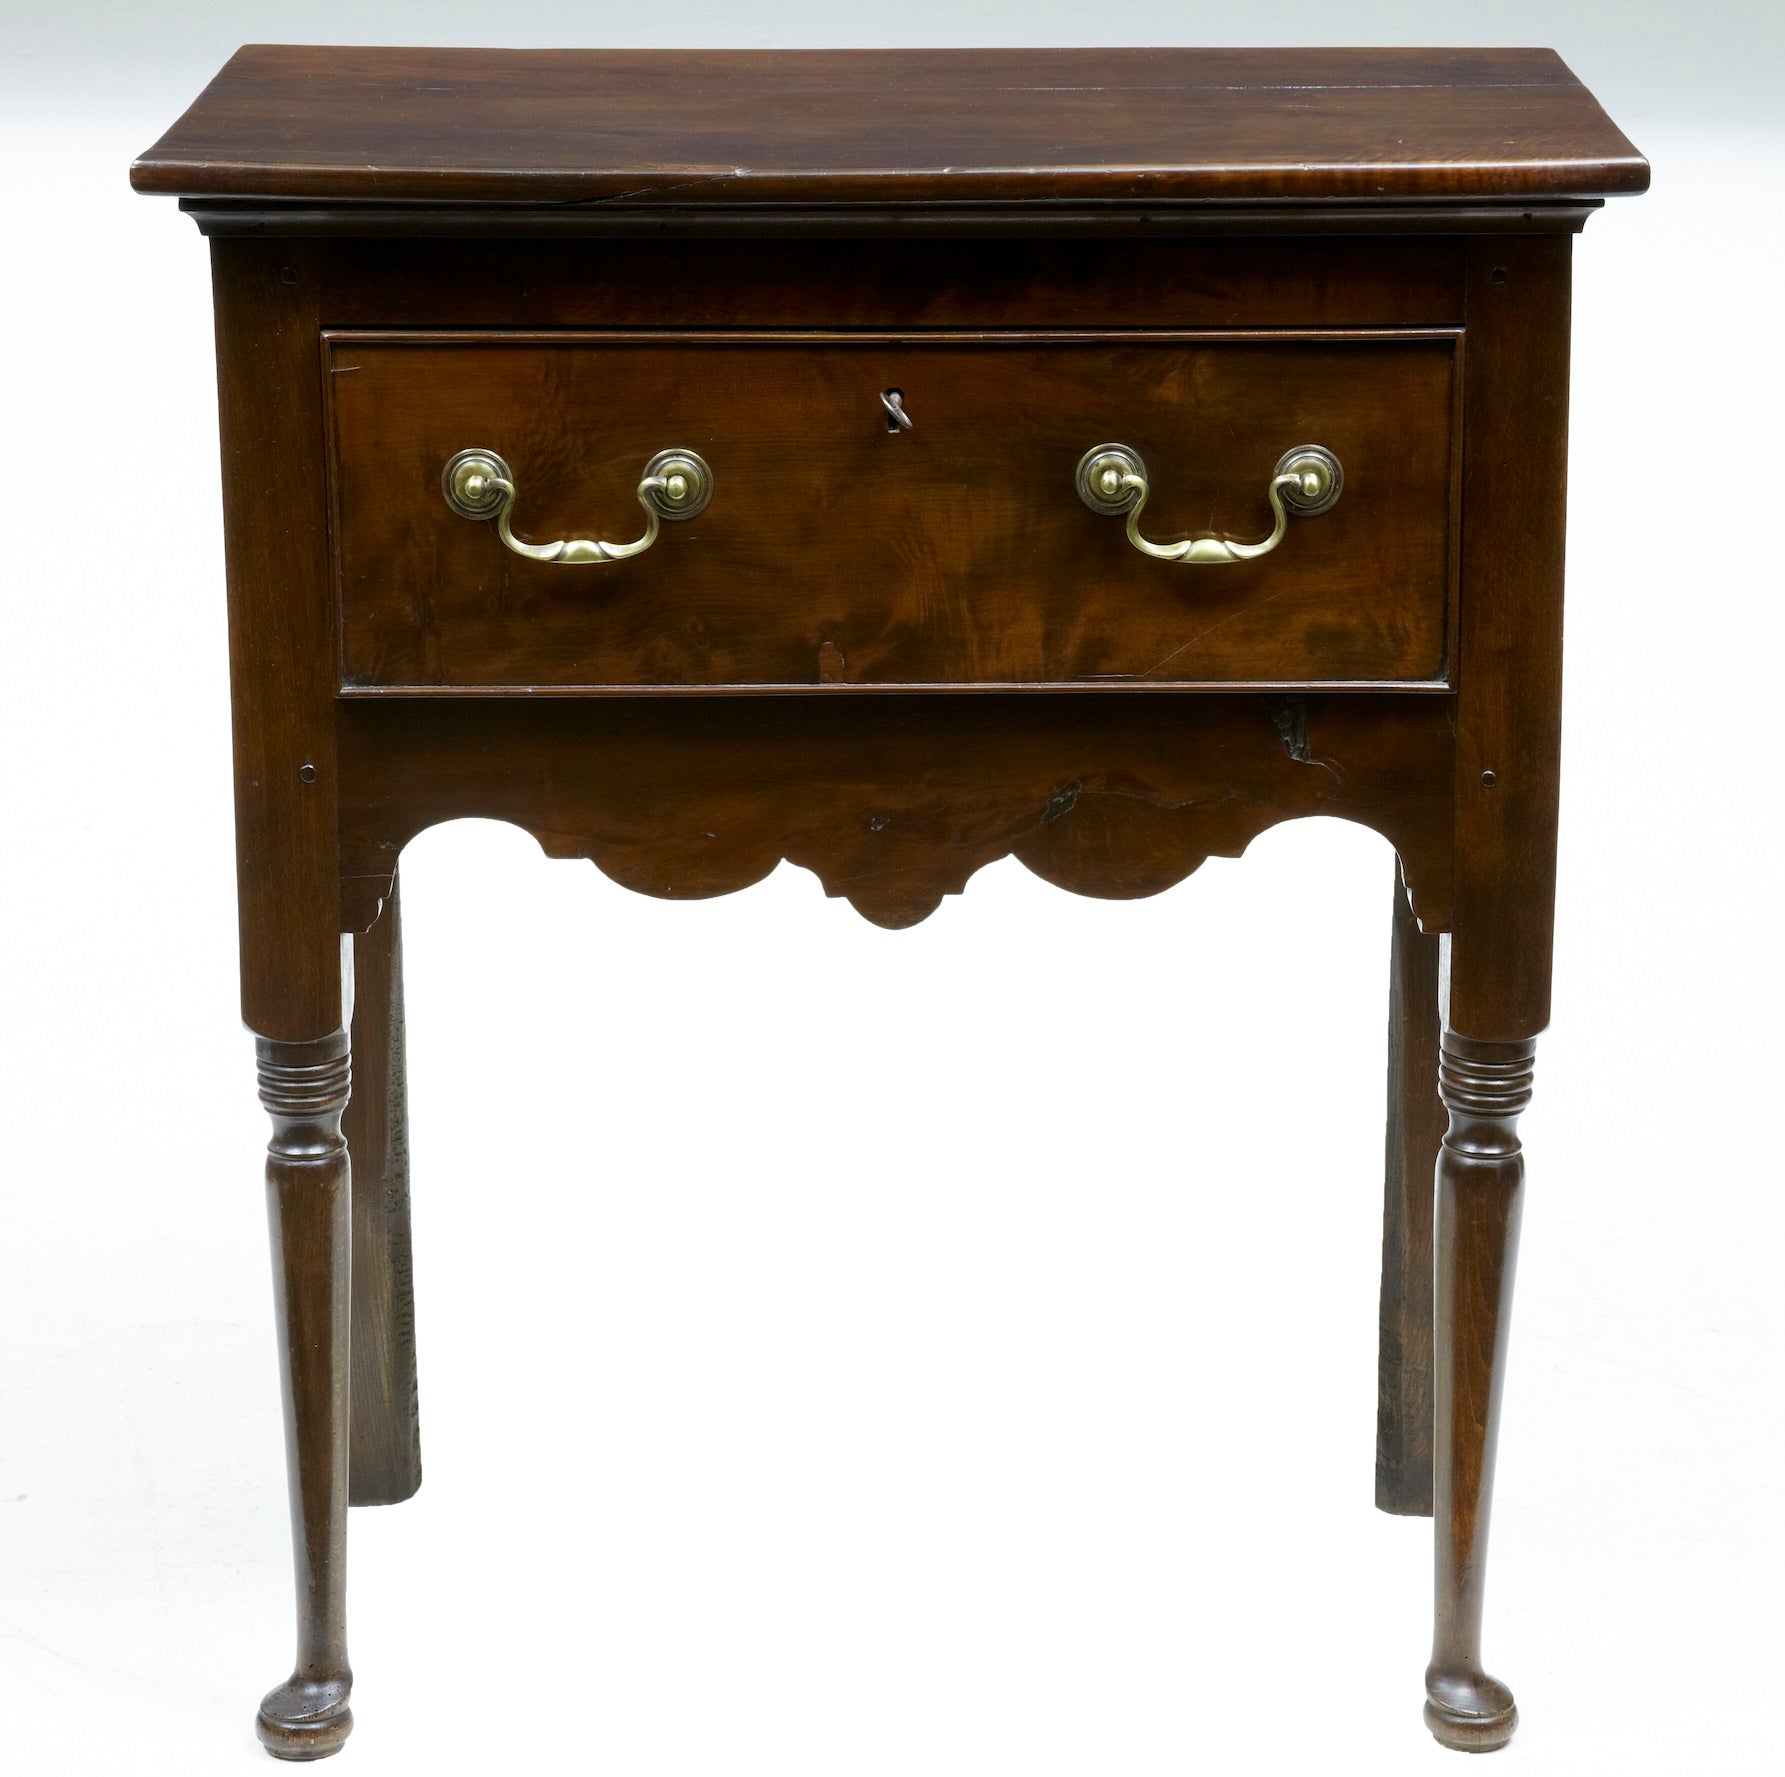 18th Century, Antique Small Yew Wood Side Table Dresser